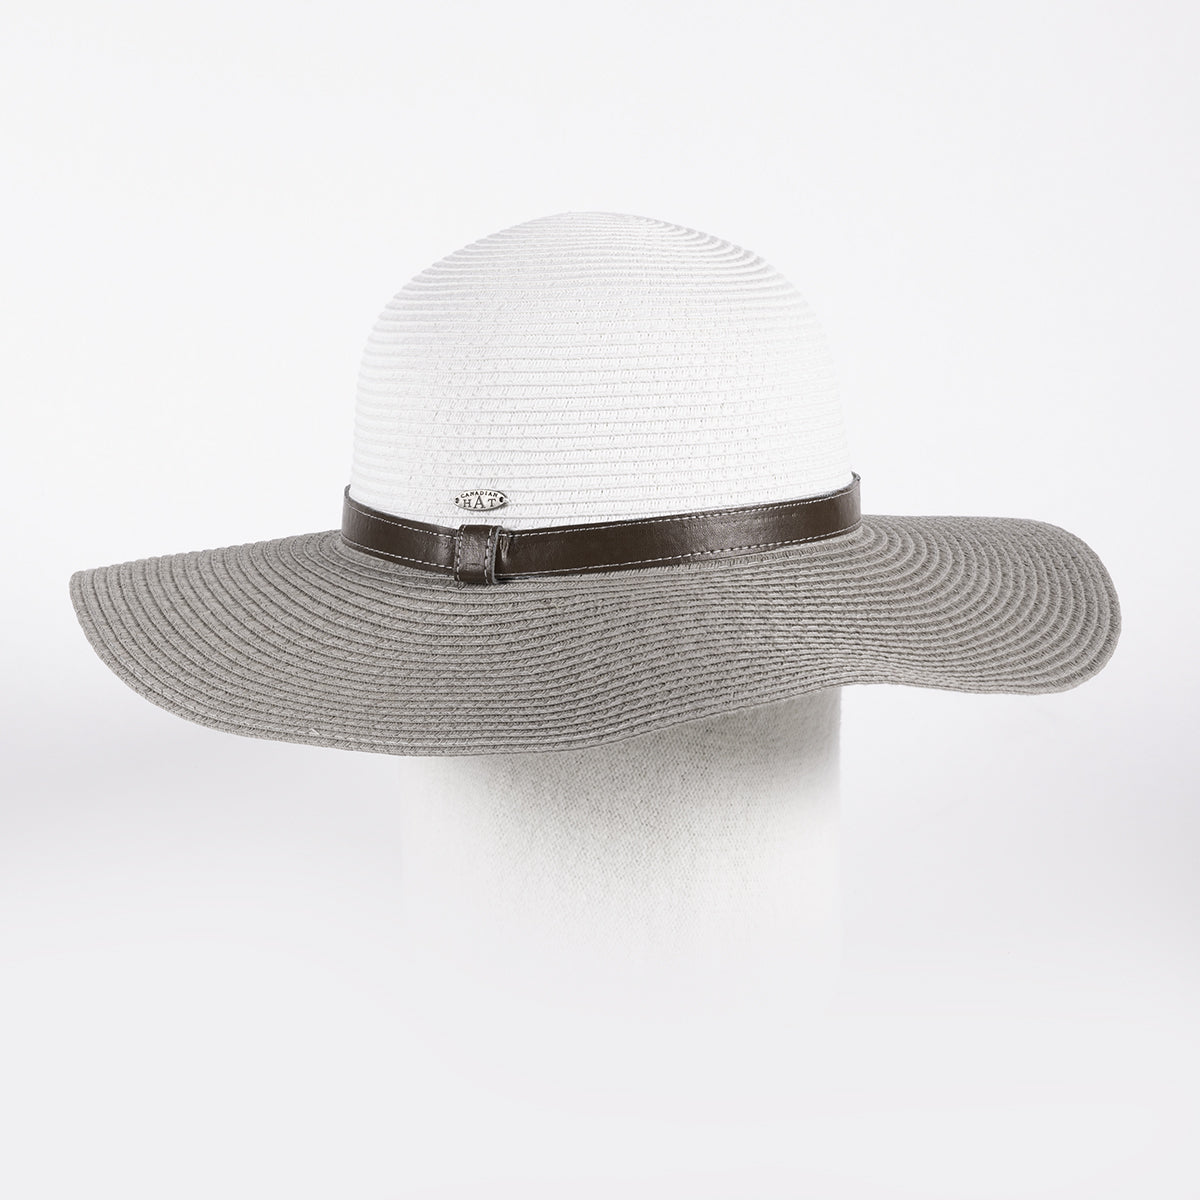 COPACAP - FLOPPY HAT COLOUR - BLOCKED WITH LEATHER BAND